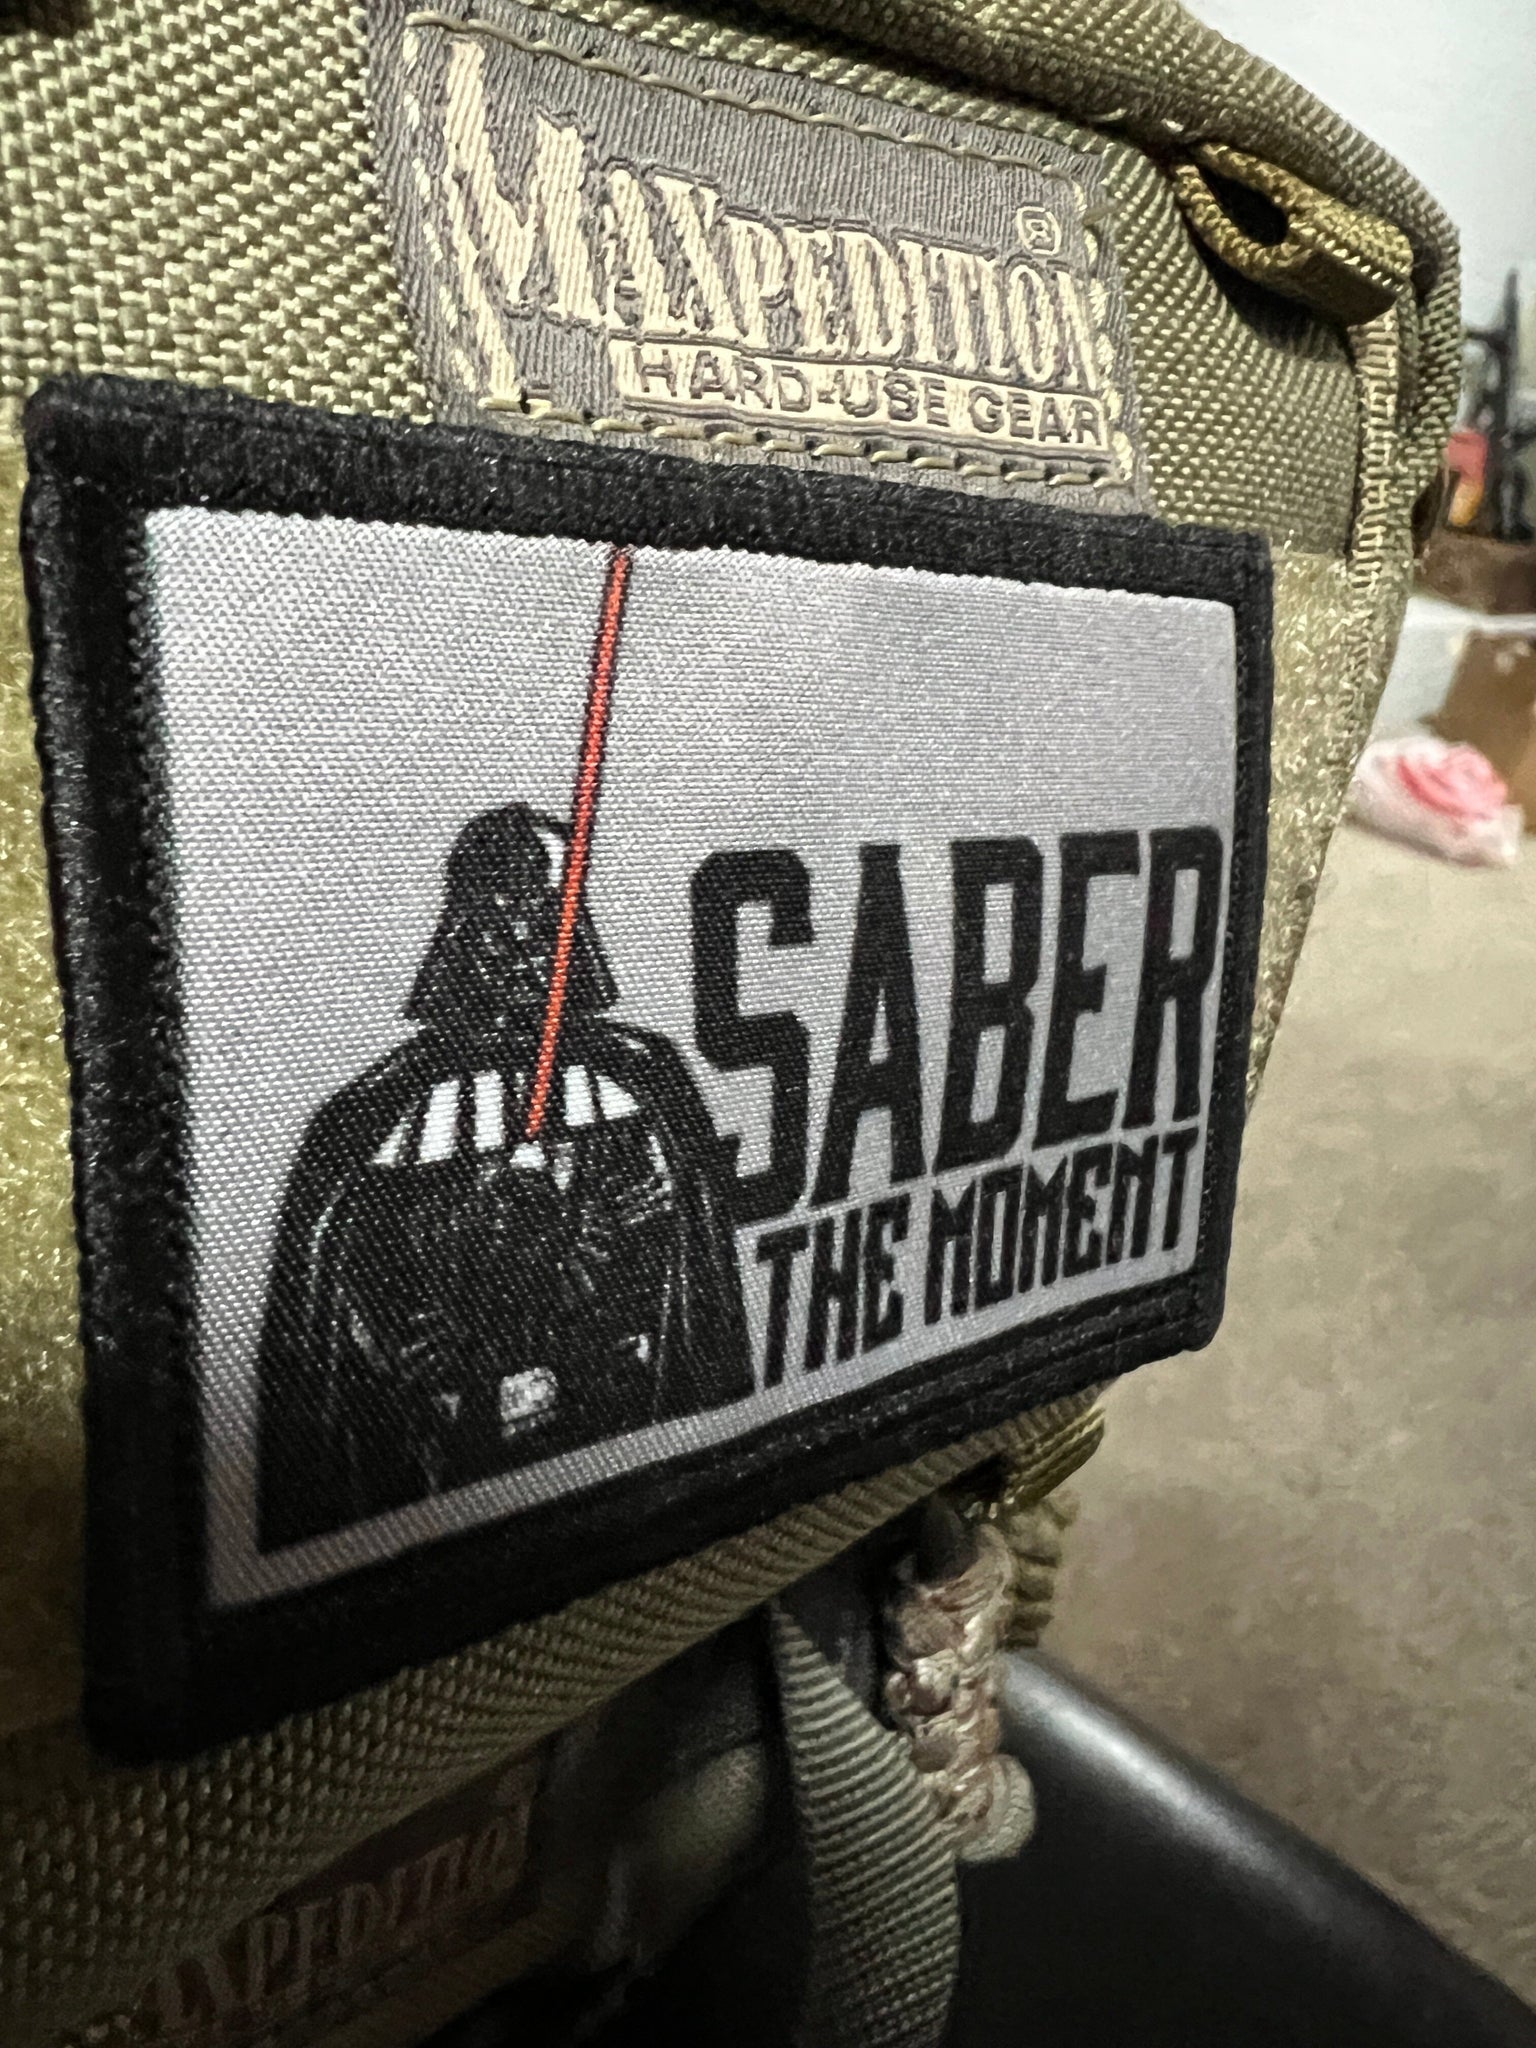 Star Wars Darth Vader Saber the Moment Morale Patch Morale Patches Redheaded T Shirts 